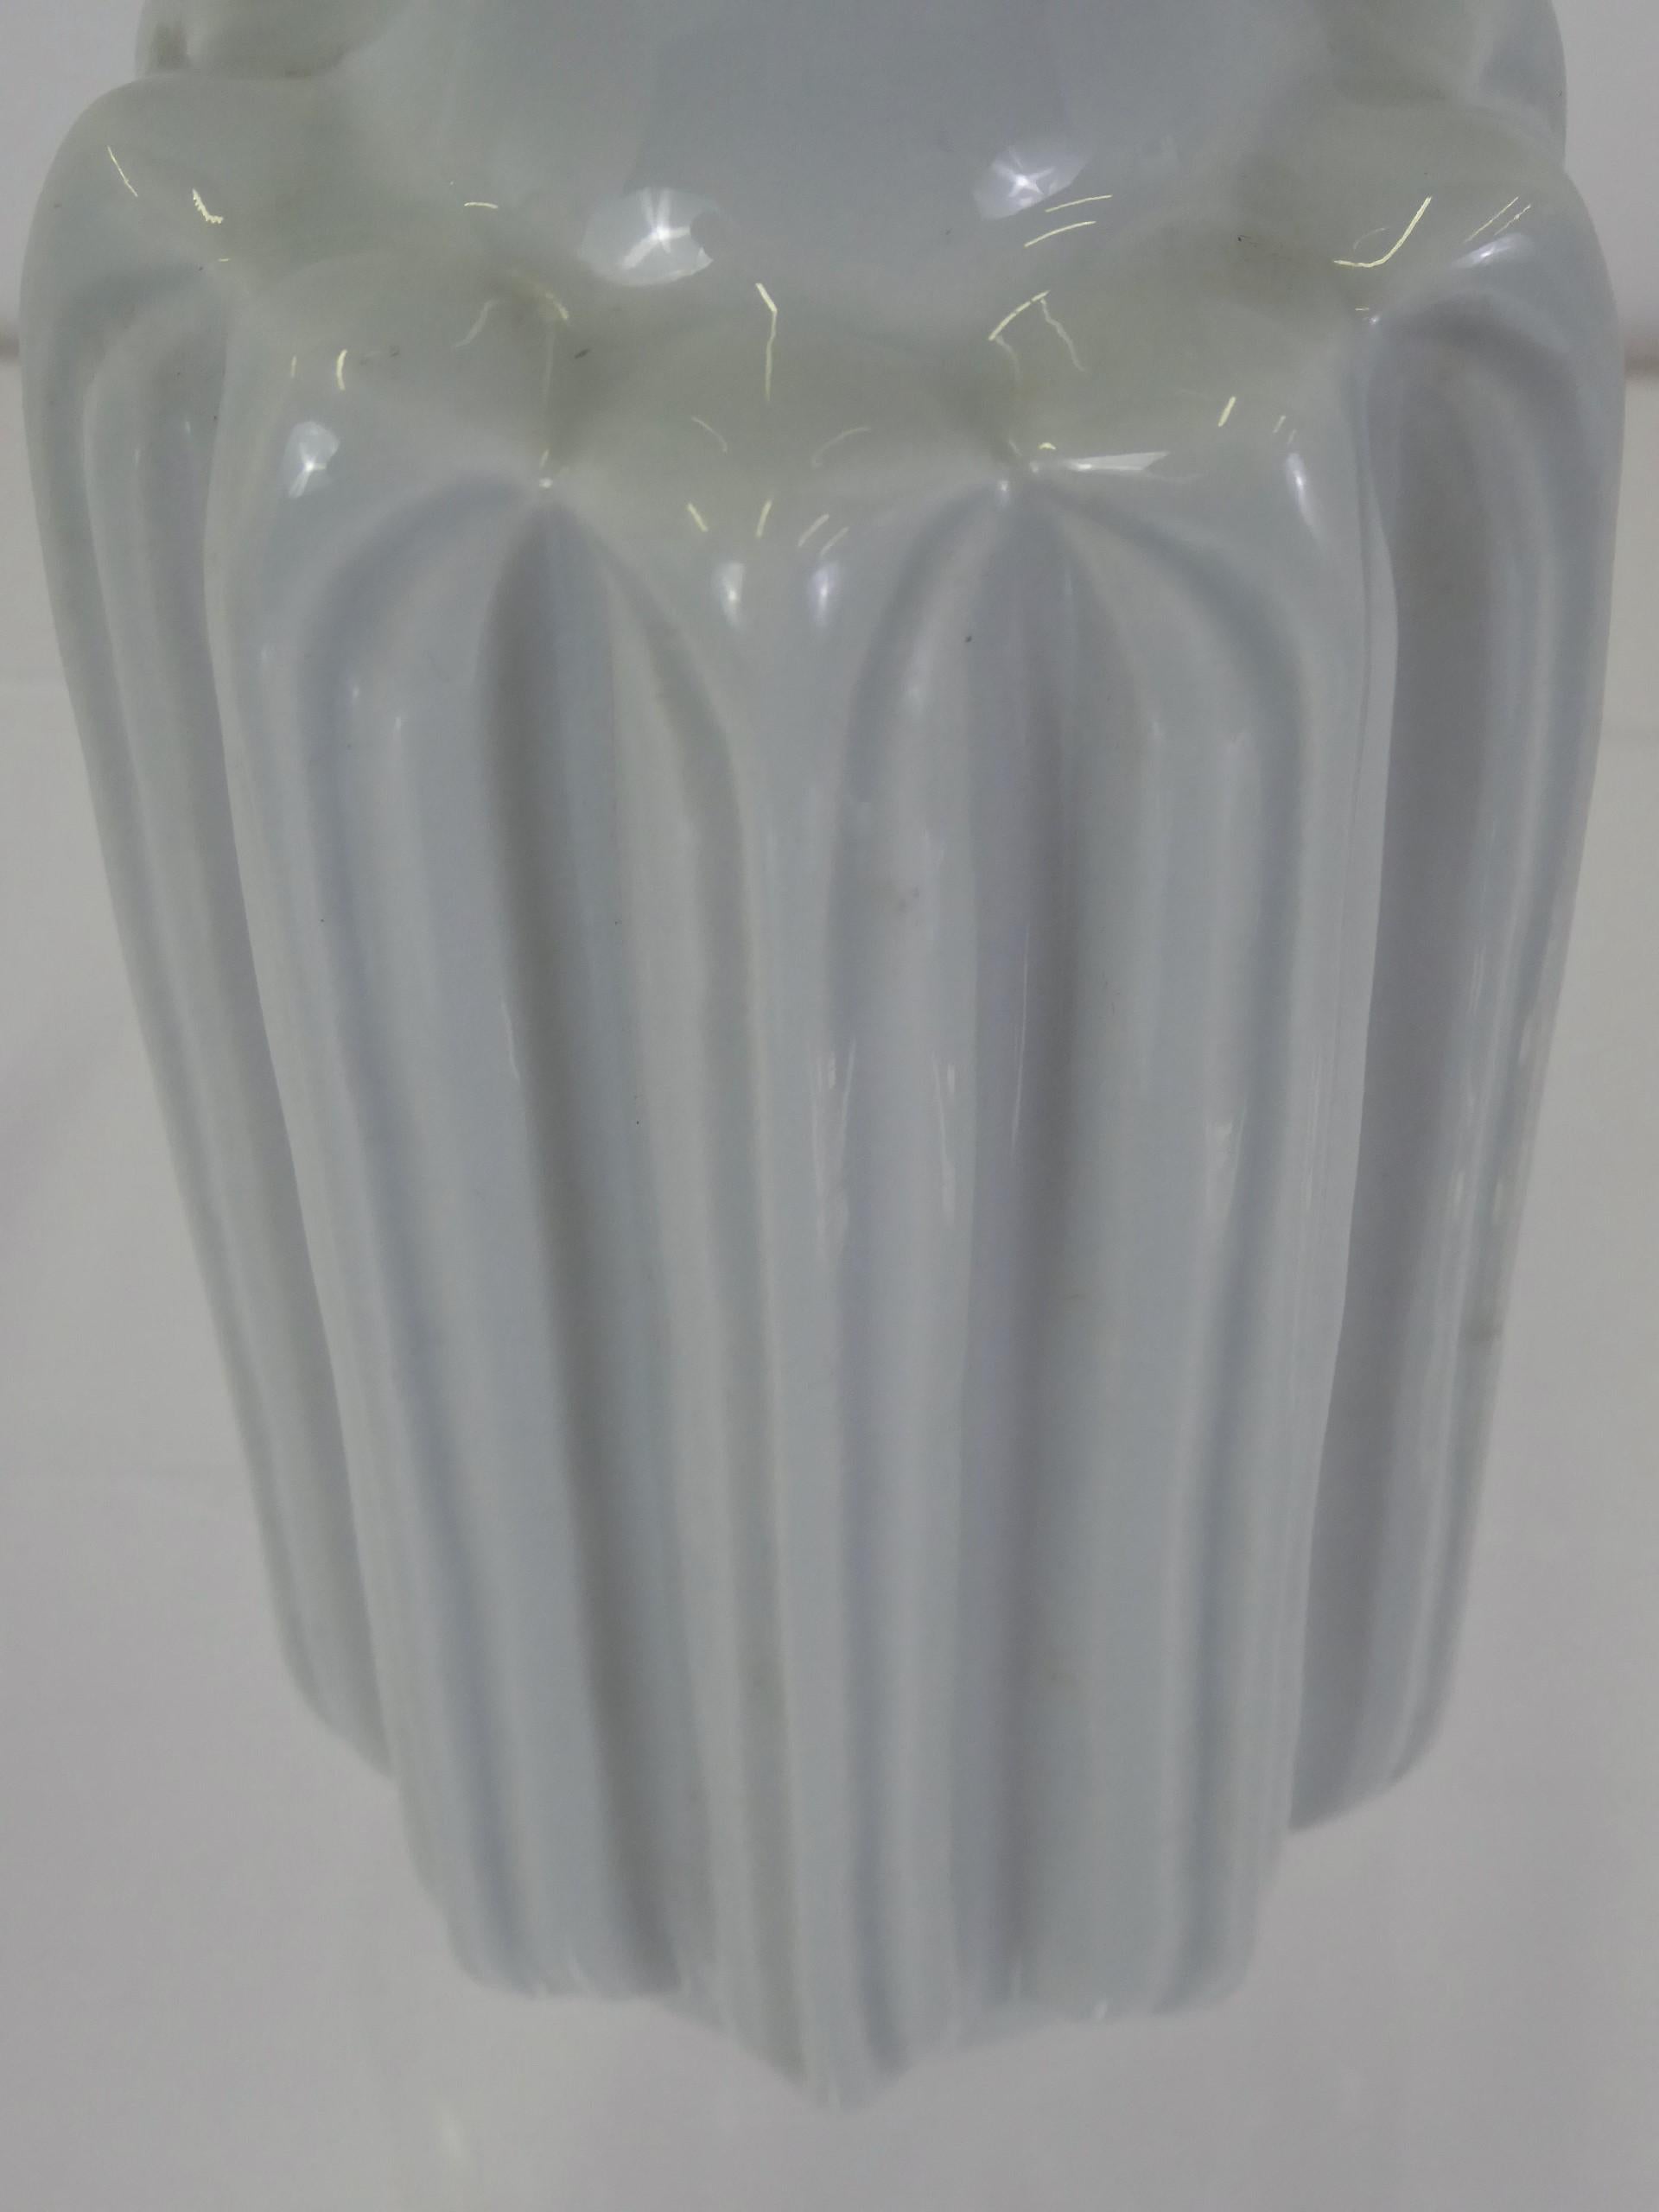 Hand-thrown celadon colored ceramic vase by Lisbeth Munch-Petersen (1909-1997) for B & G Copenhagen from 1960s.

Munch-Petersen followed her father’s profession, Danish ceramist Hans Adolph Hjort (1878-1966), to also become a potter. Lisbeth along